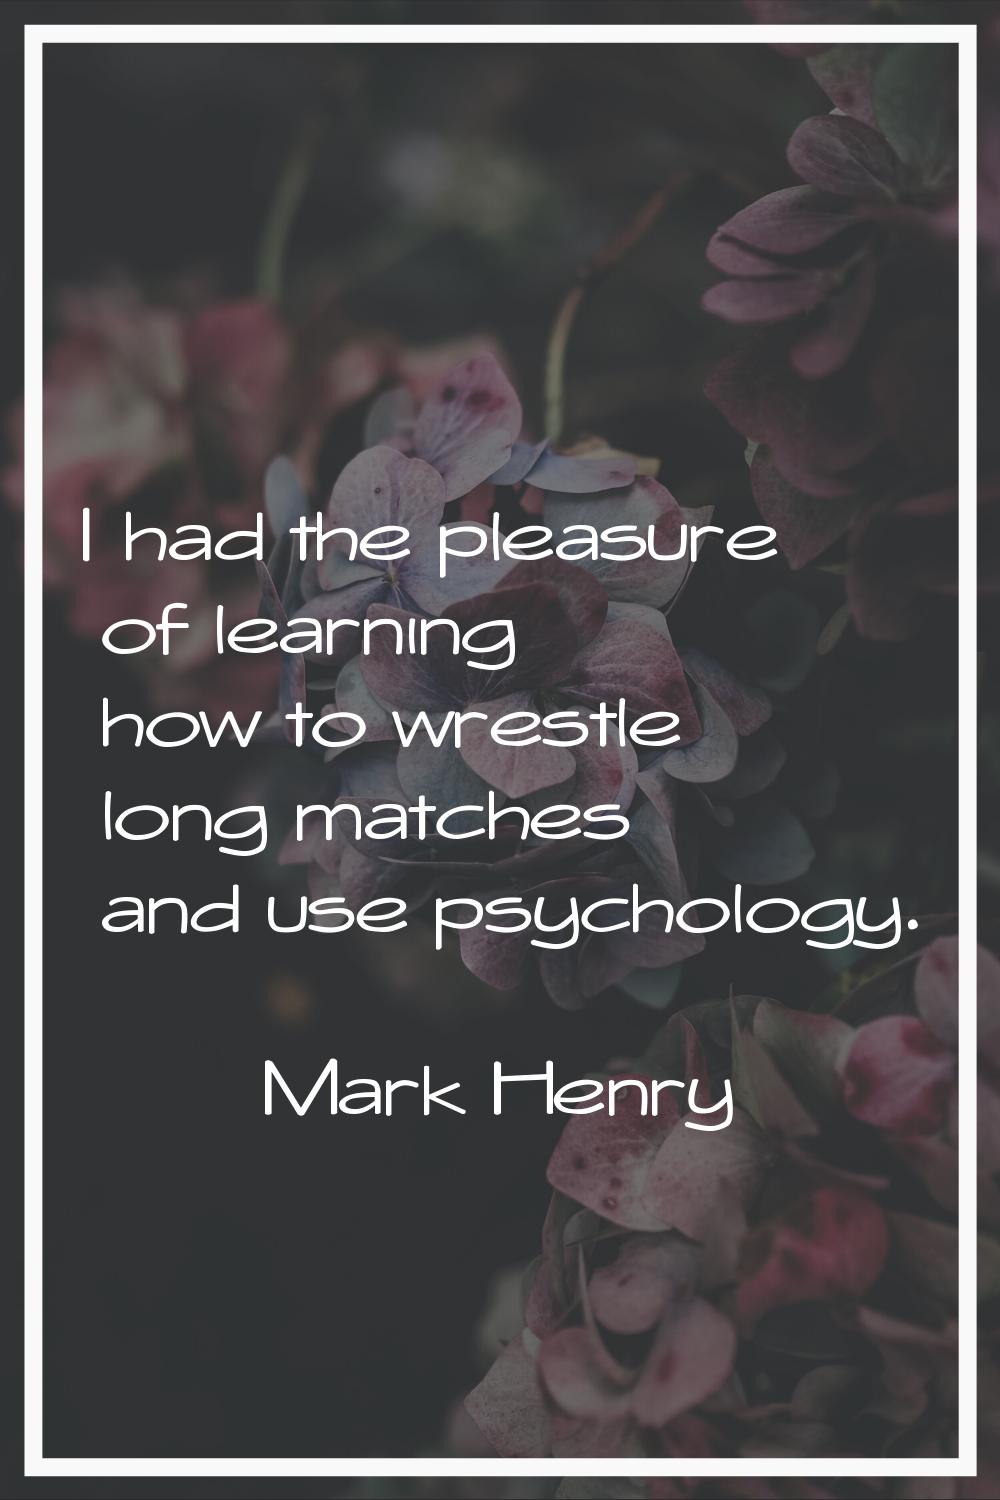 I had the pleasure of learning how to wrestle long matches and use psychology.